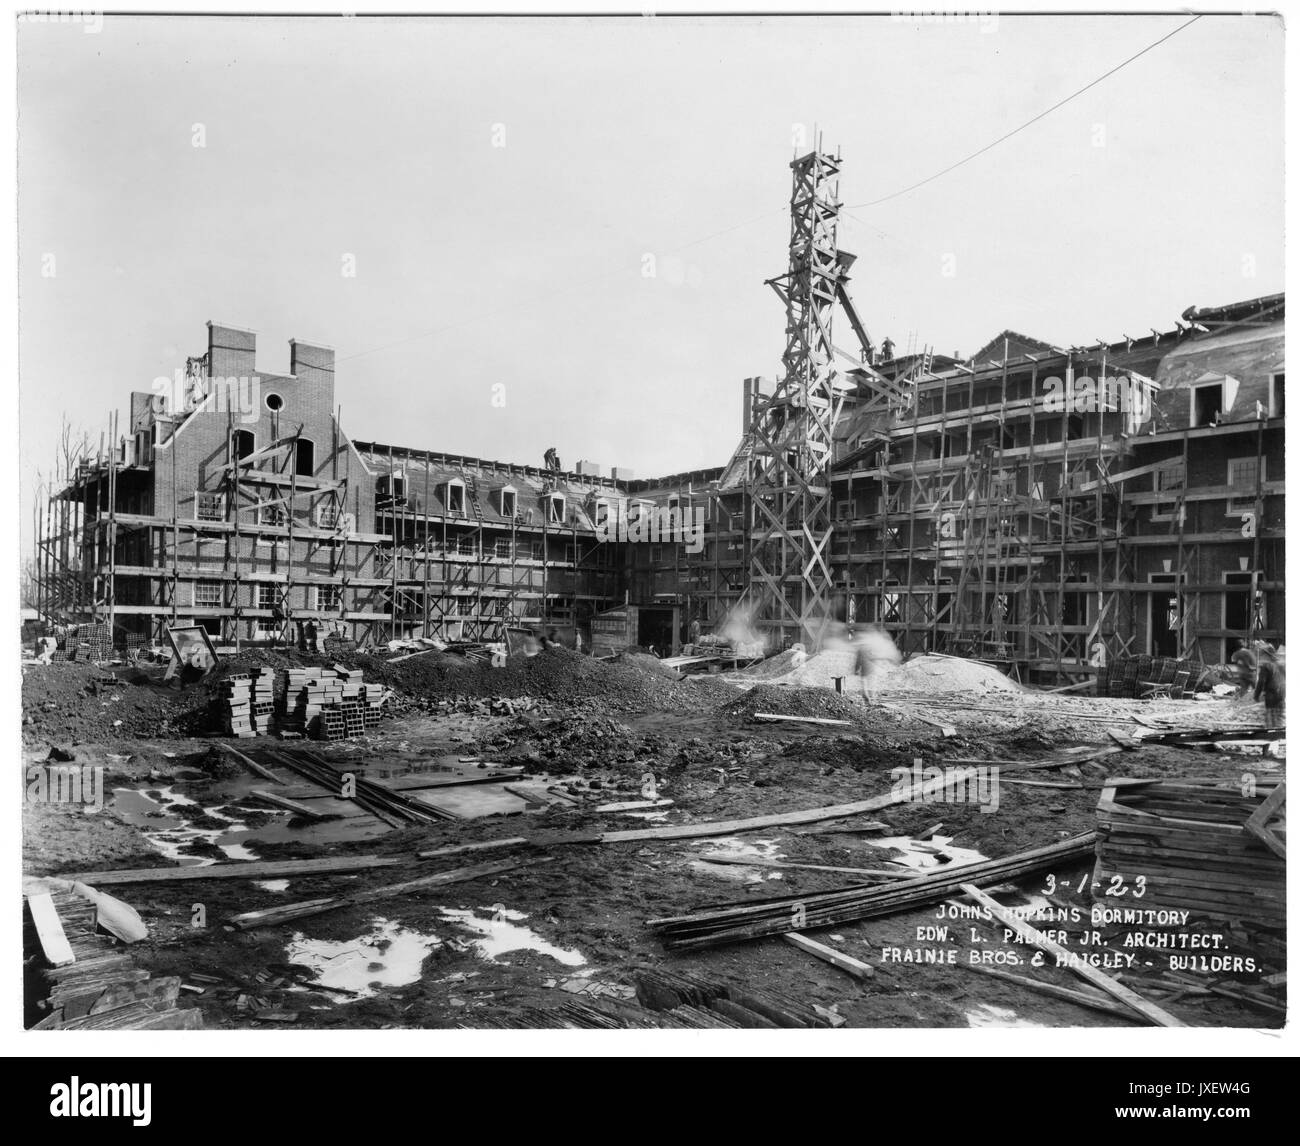 Alumni Memorial Residences AMR and courtyard under construction, Scaffolding around building, Men working on the rooftops, as well as on the ground, A lot of construction material piled in the courtyard area, 1923. Stock Photo